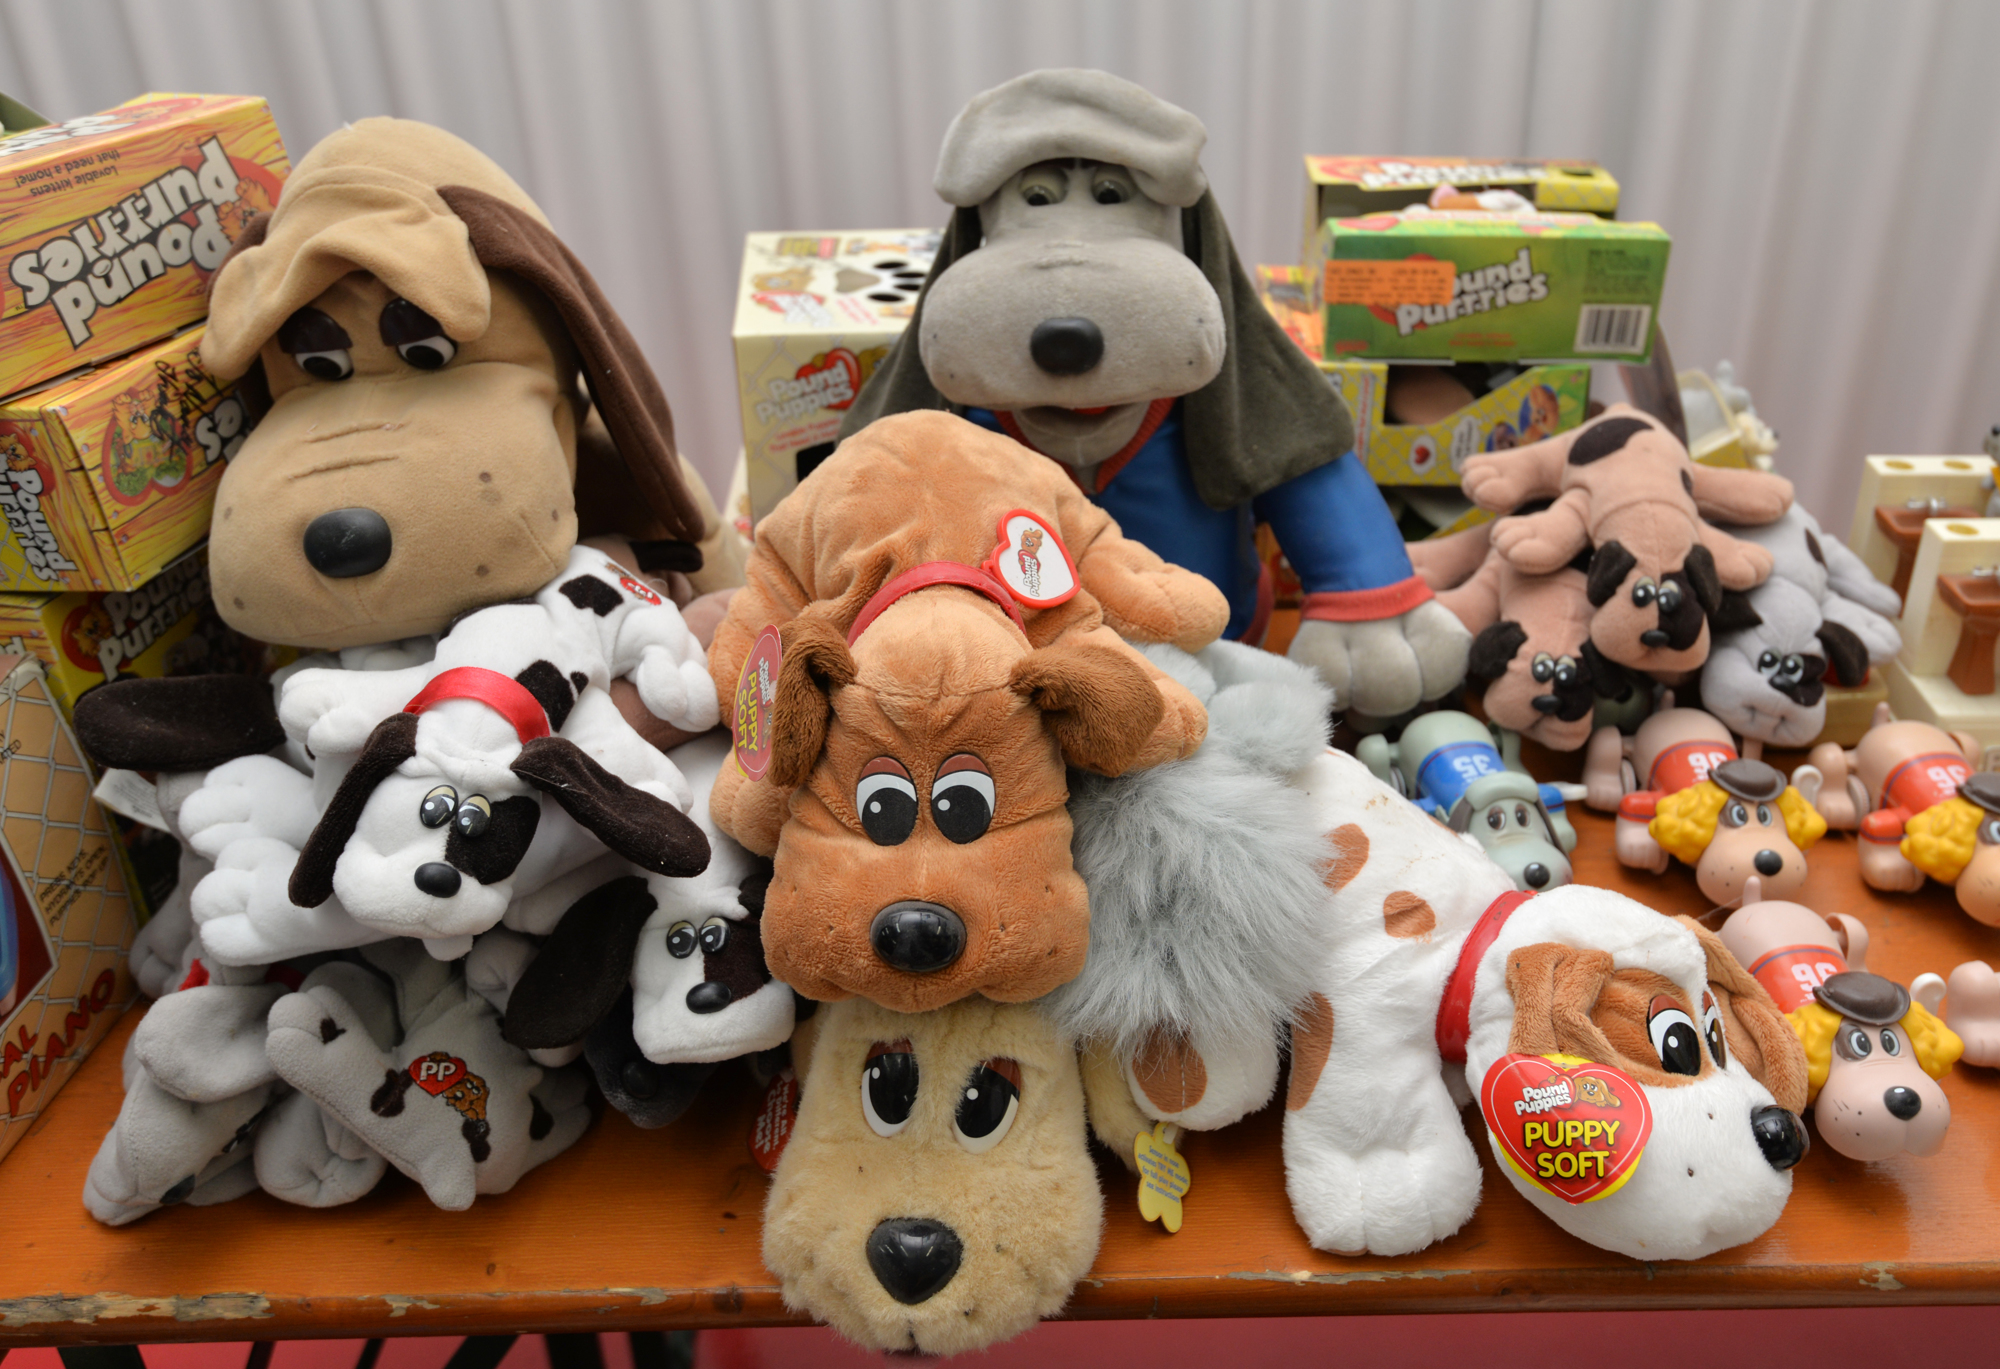 Pound Puppies inventor: Don't let excuses derail your ideas